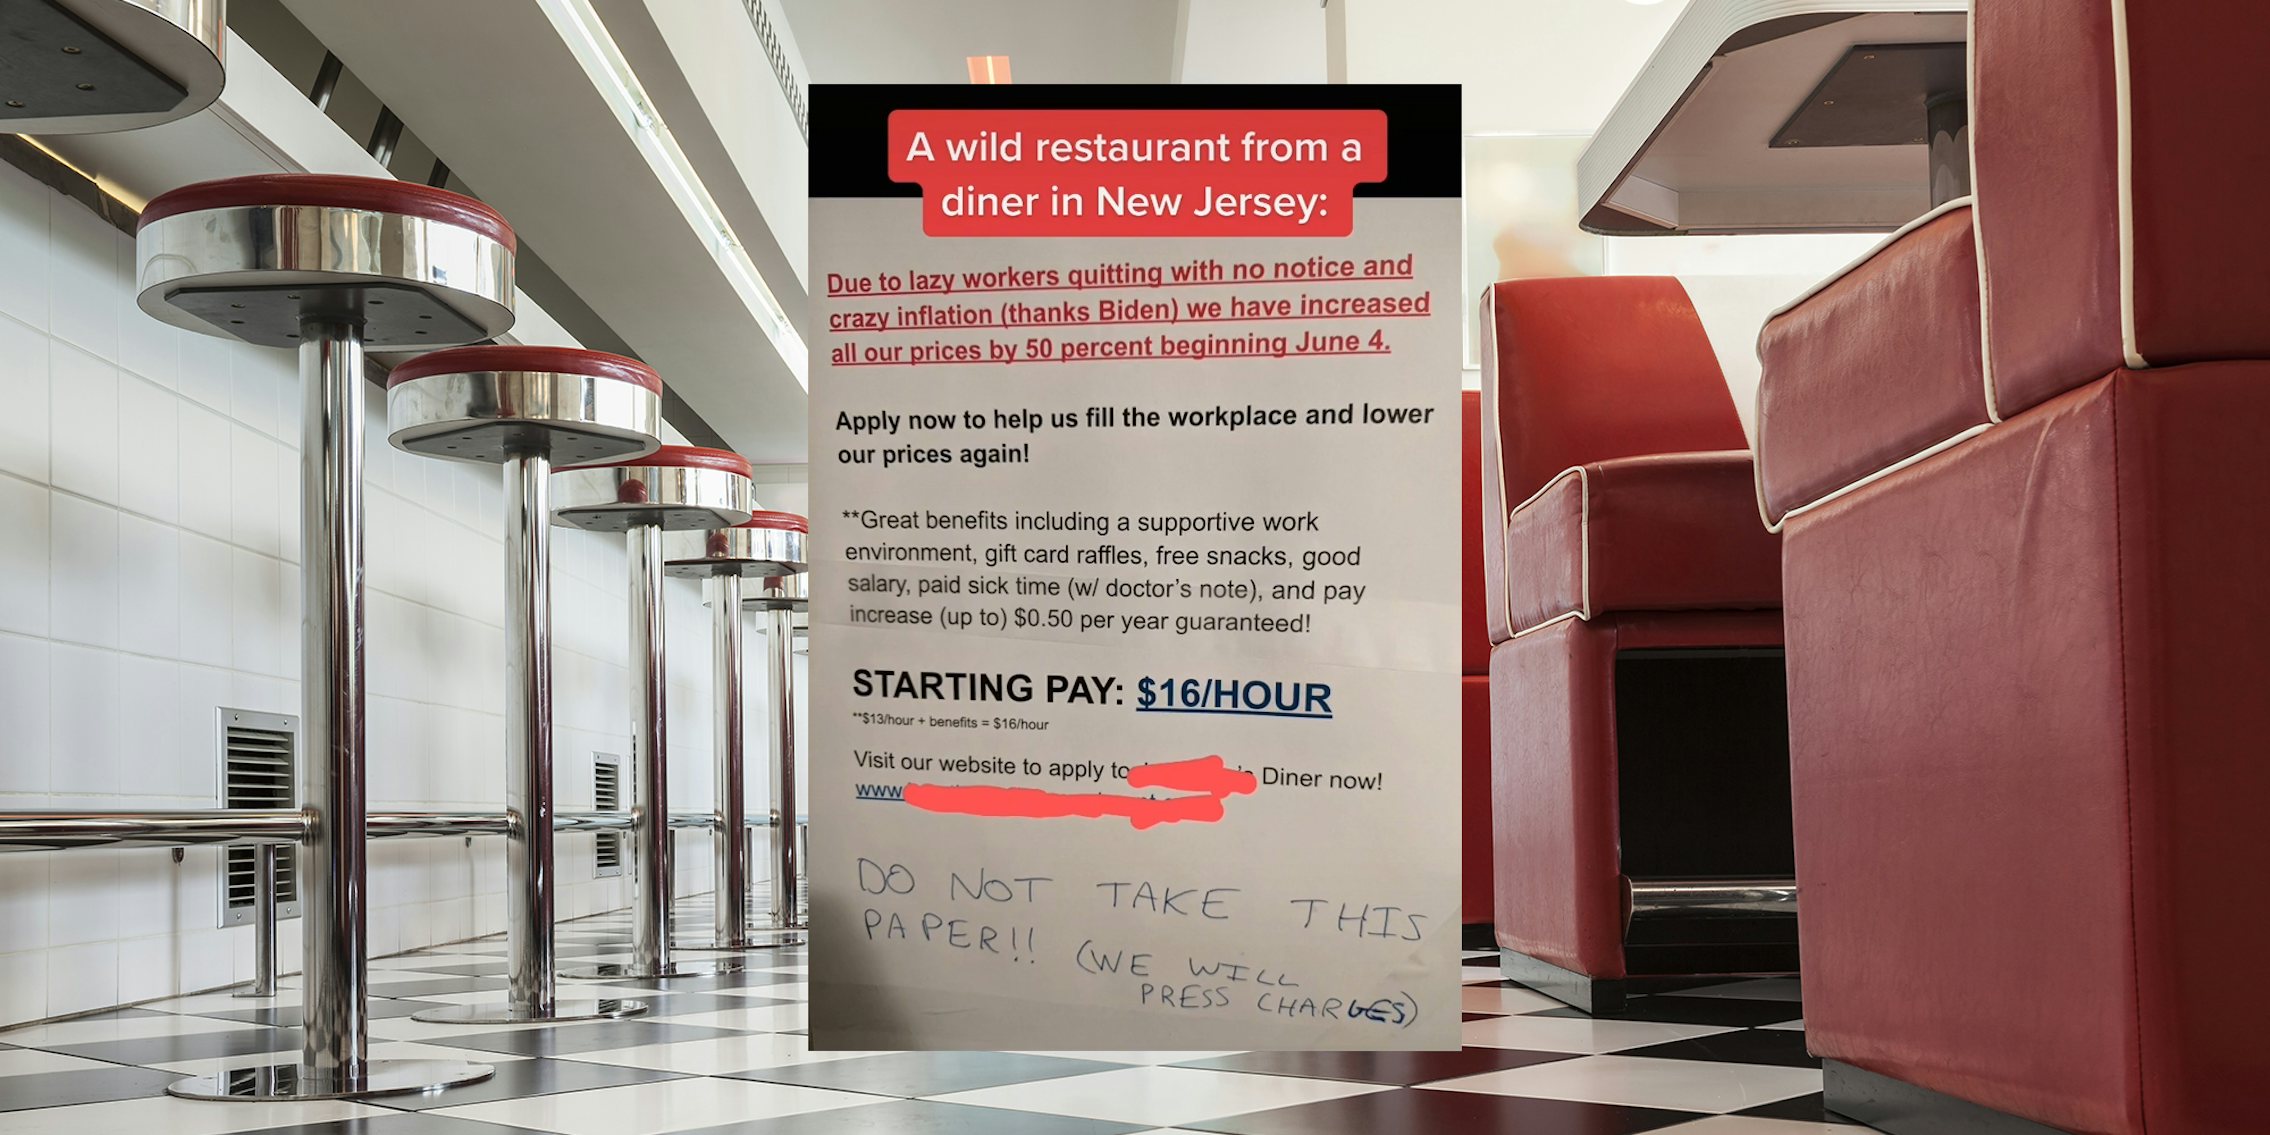 hiring sign over diner background with caption 'a wild restaurant from a diner in new jersey'